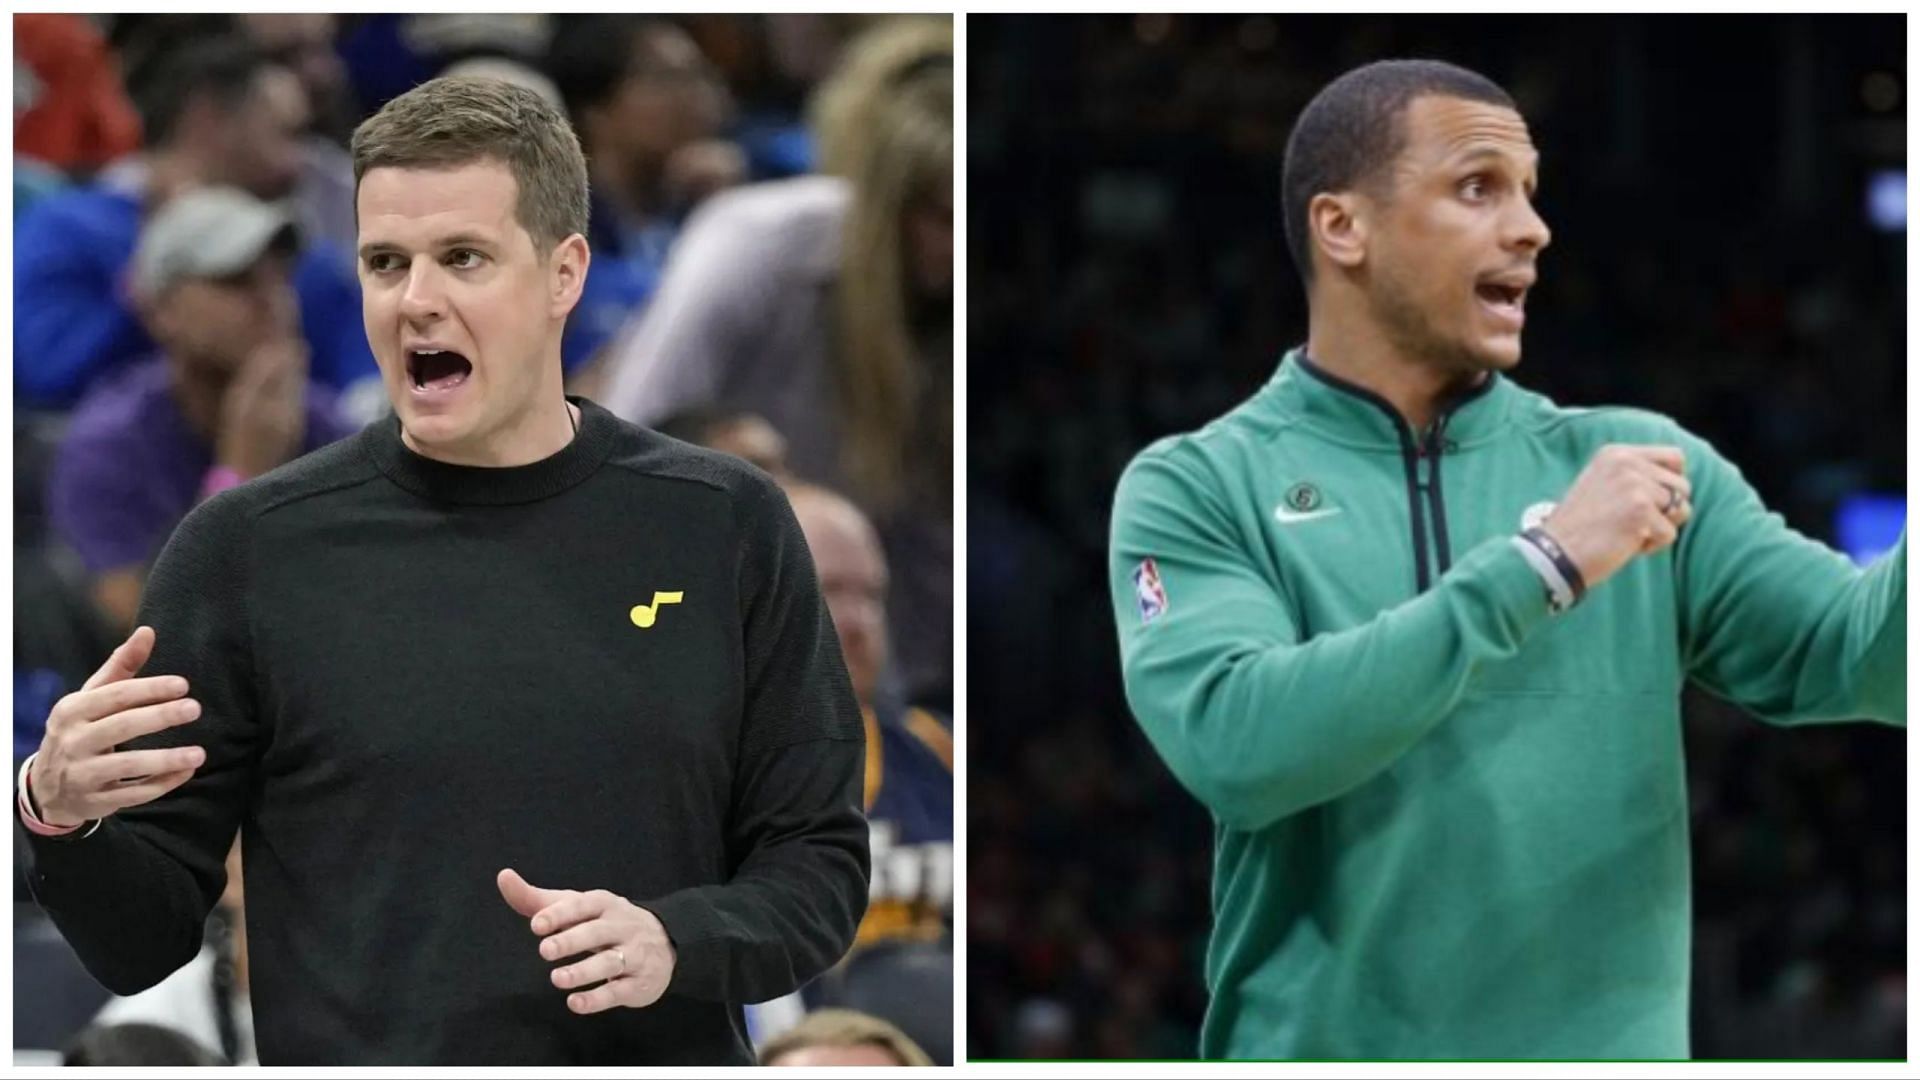 Will Hardy (left) and Joe Mazzulla (right) are the two youngest NBA coaches (Photo credit: AP/ John Raoux and Mary Schwalm)